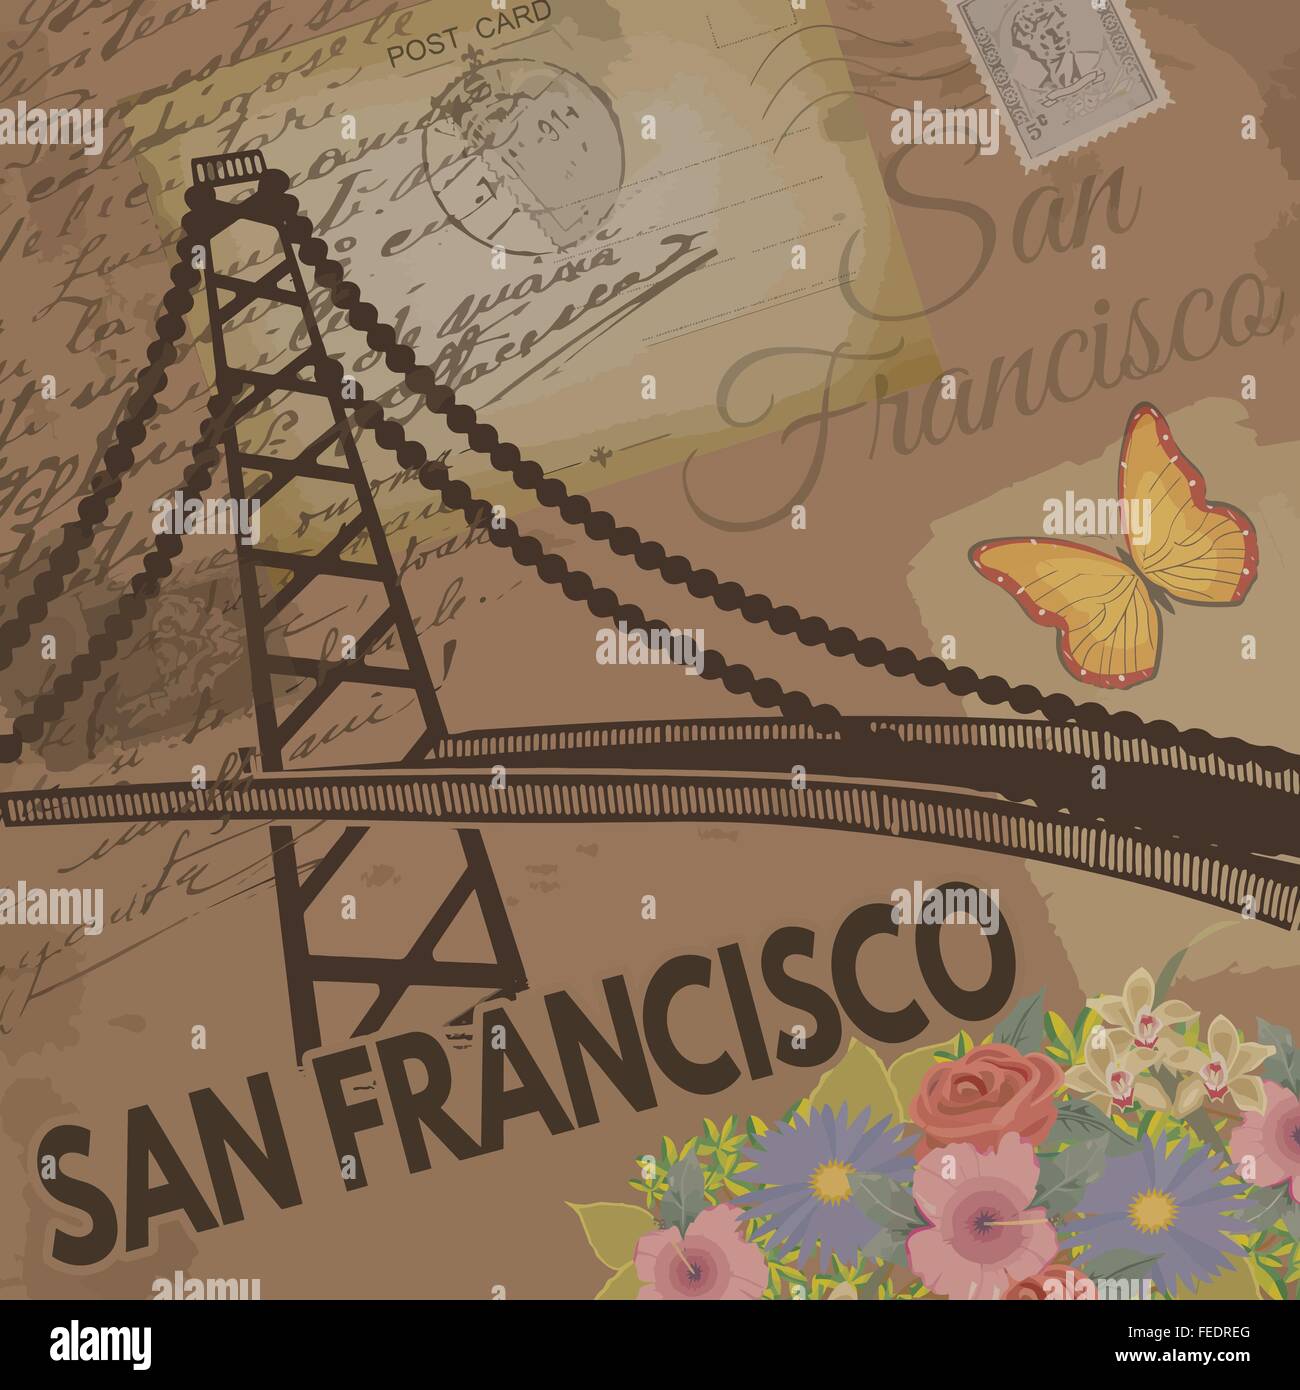 San Francisco vintage poster on nostalgic retro background with old post cards, letters and Golden gate bridge, vector illustrat Stock Vector